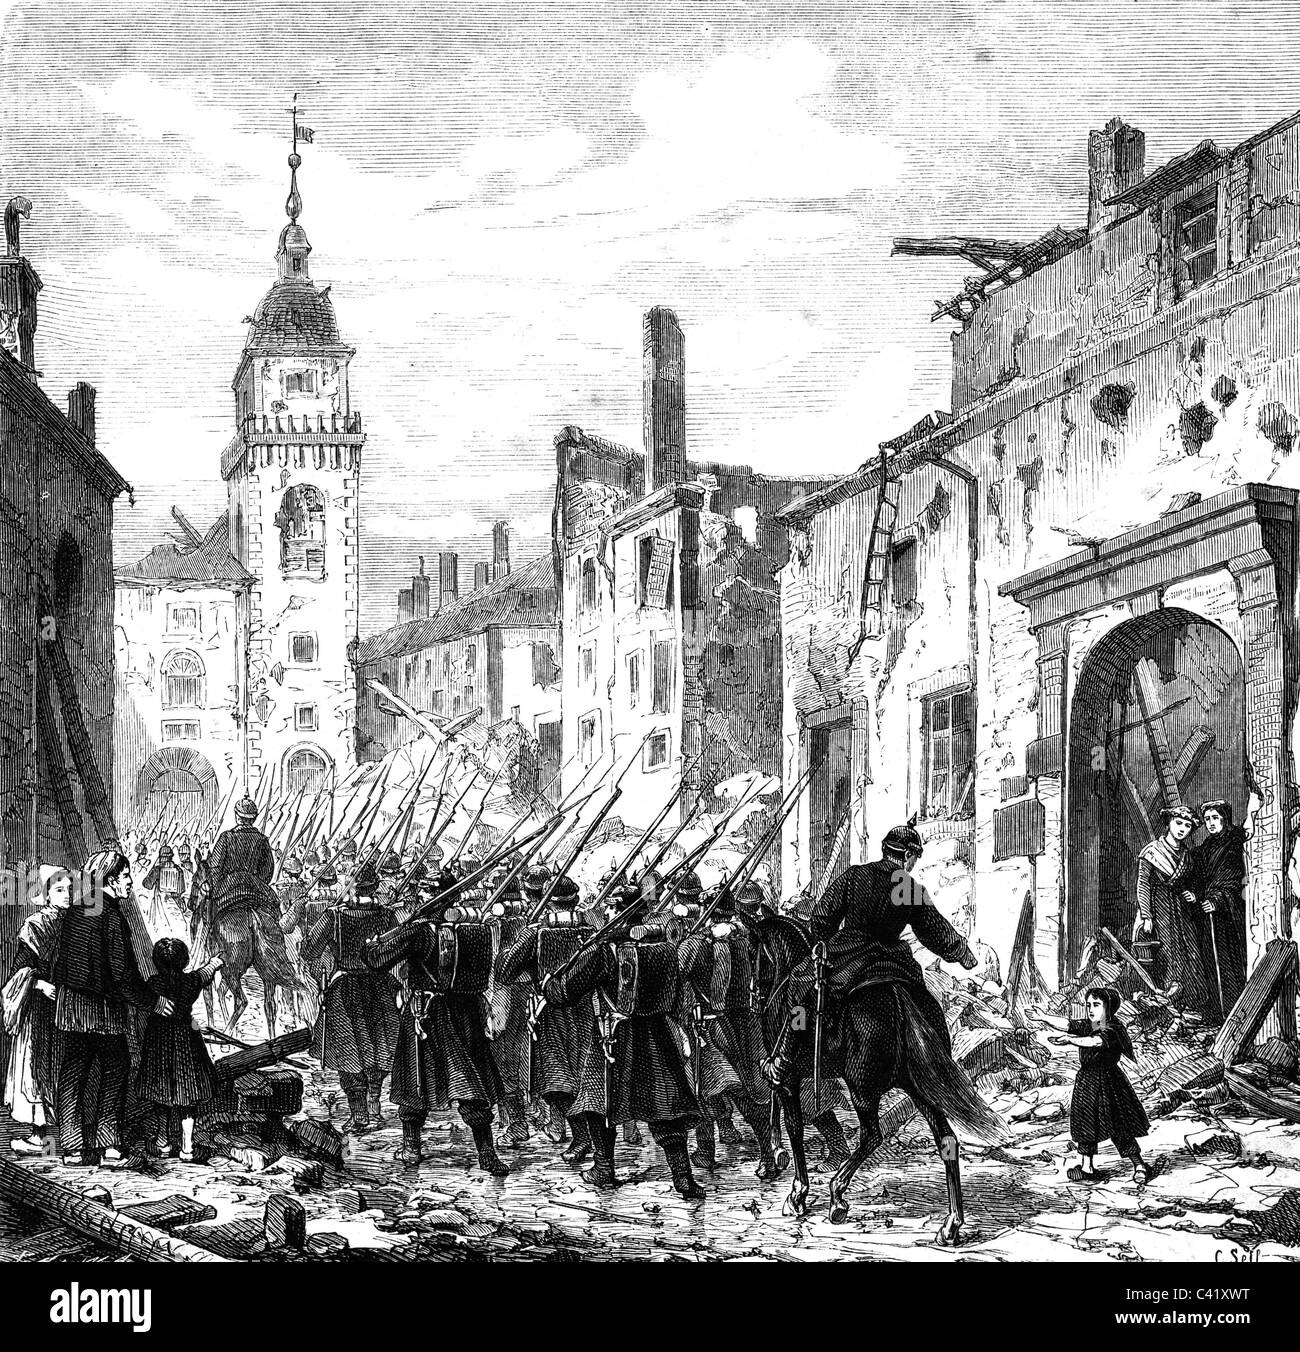 events, Franco-Prussian War 1870 - 1871, Siege of Thionville(Diedenhofen) 9.- 25.11.1870, Prussian troops entering the town, 25.11.1870, contemporary wood engraving after drawing by Christian Sell, Prussia, Prussians, occupation, soldiers, civilists, women, children, ruins, Franco Prussian, Lorraine, France, Germany, 19th century, historic, historical, people, Additional-Rights-Clearences-Not Available Stock Photo